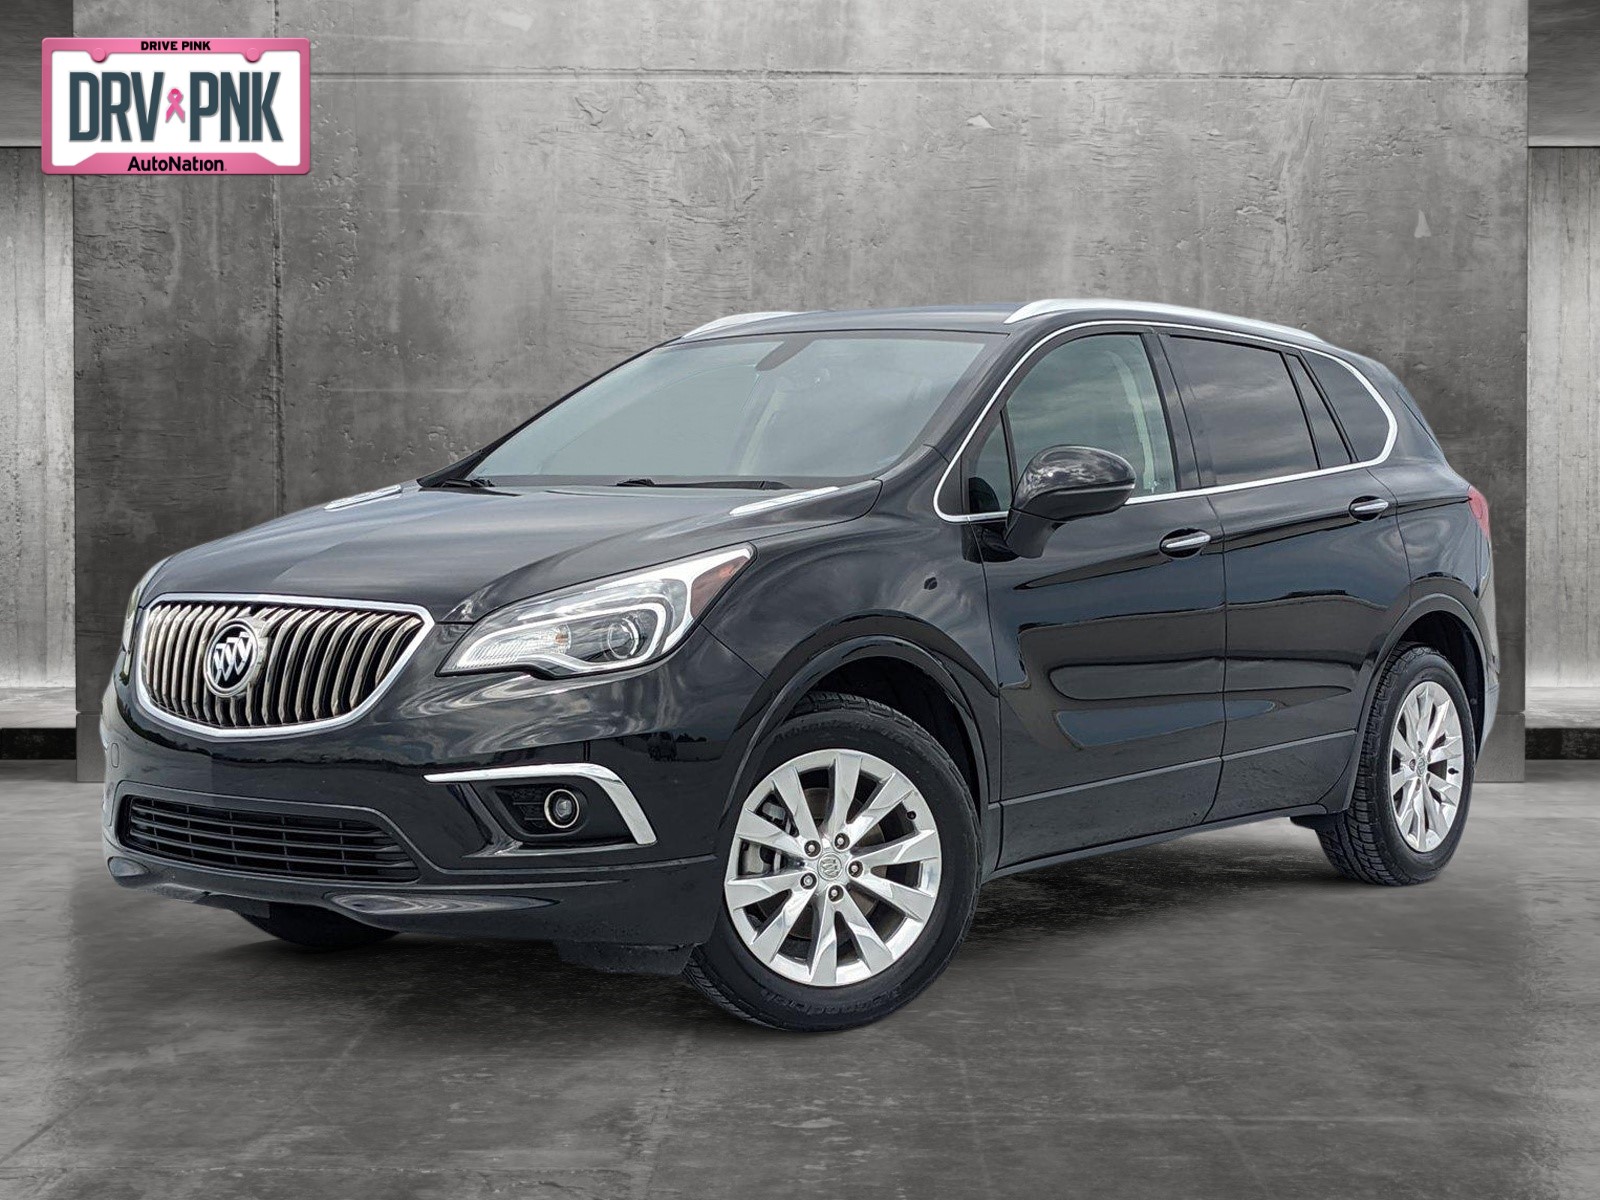 Pre-Owned 2018 Buick Envision Essence Sport Utility in West Palm Beach  #JD007622 | Lexus of Palm Beach